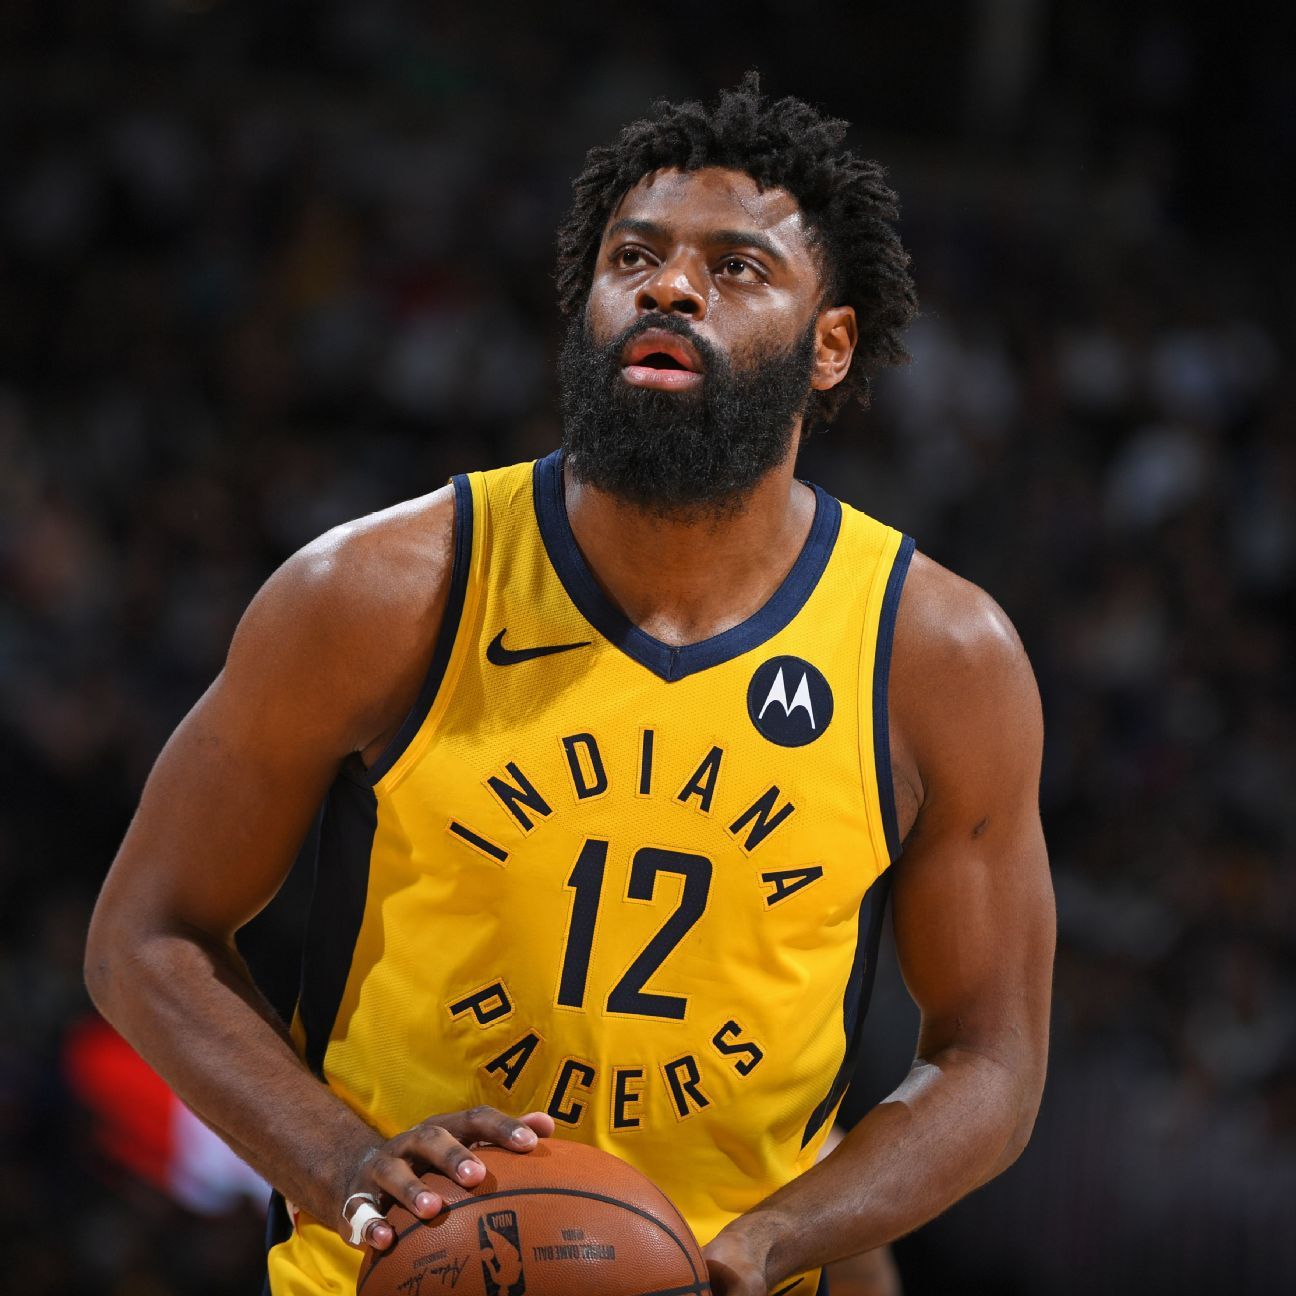 Tyreke Evans 'dismissed and disqualified' from NBA for violating anti-drug  program 